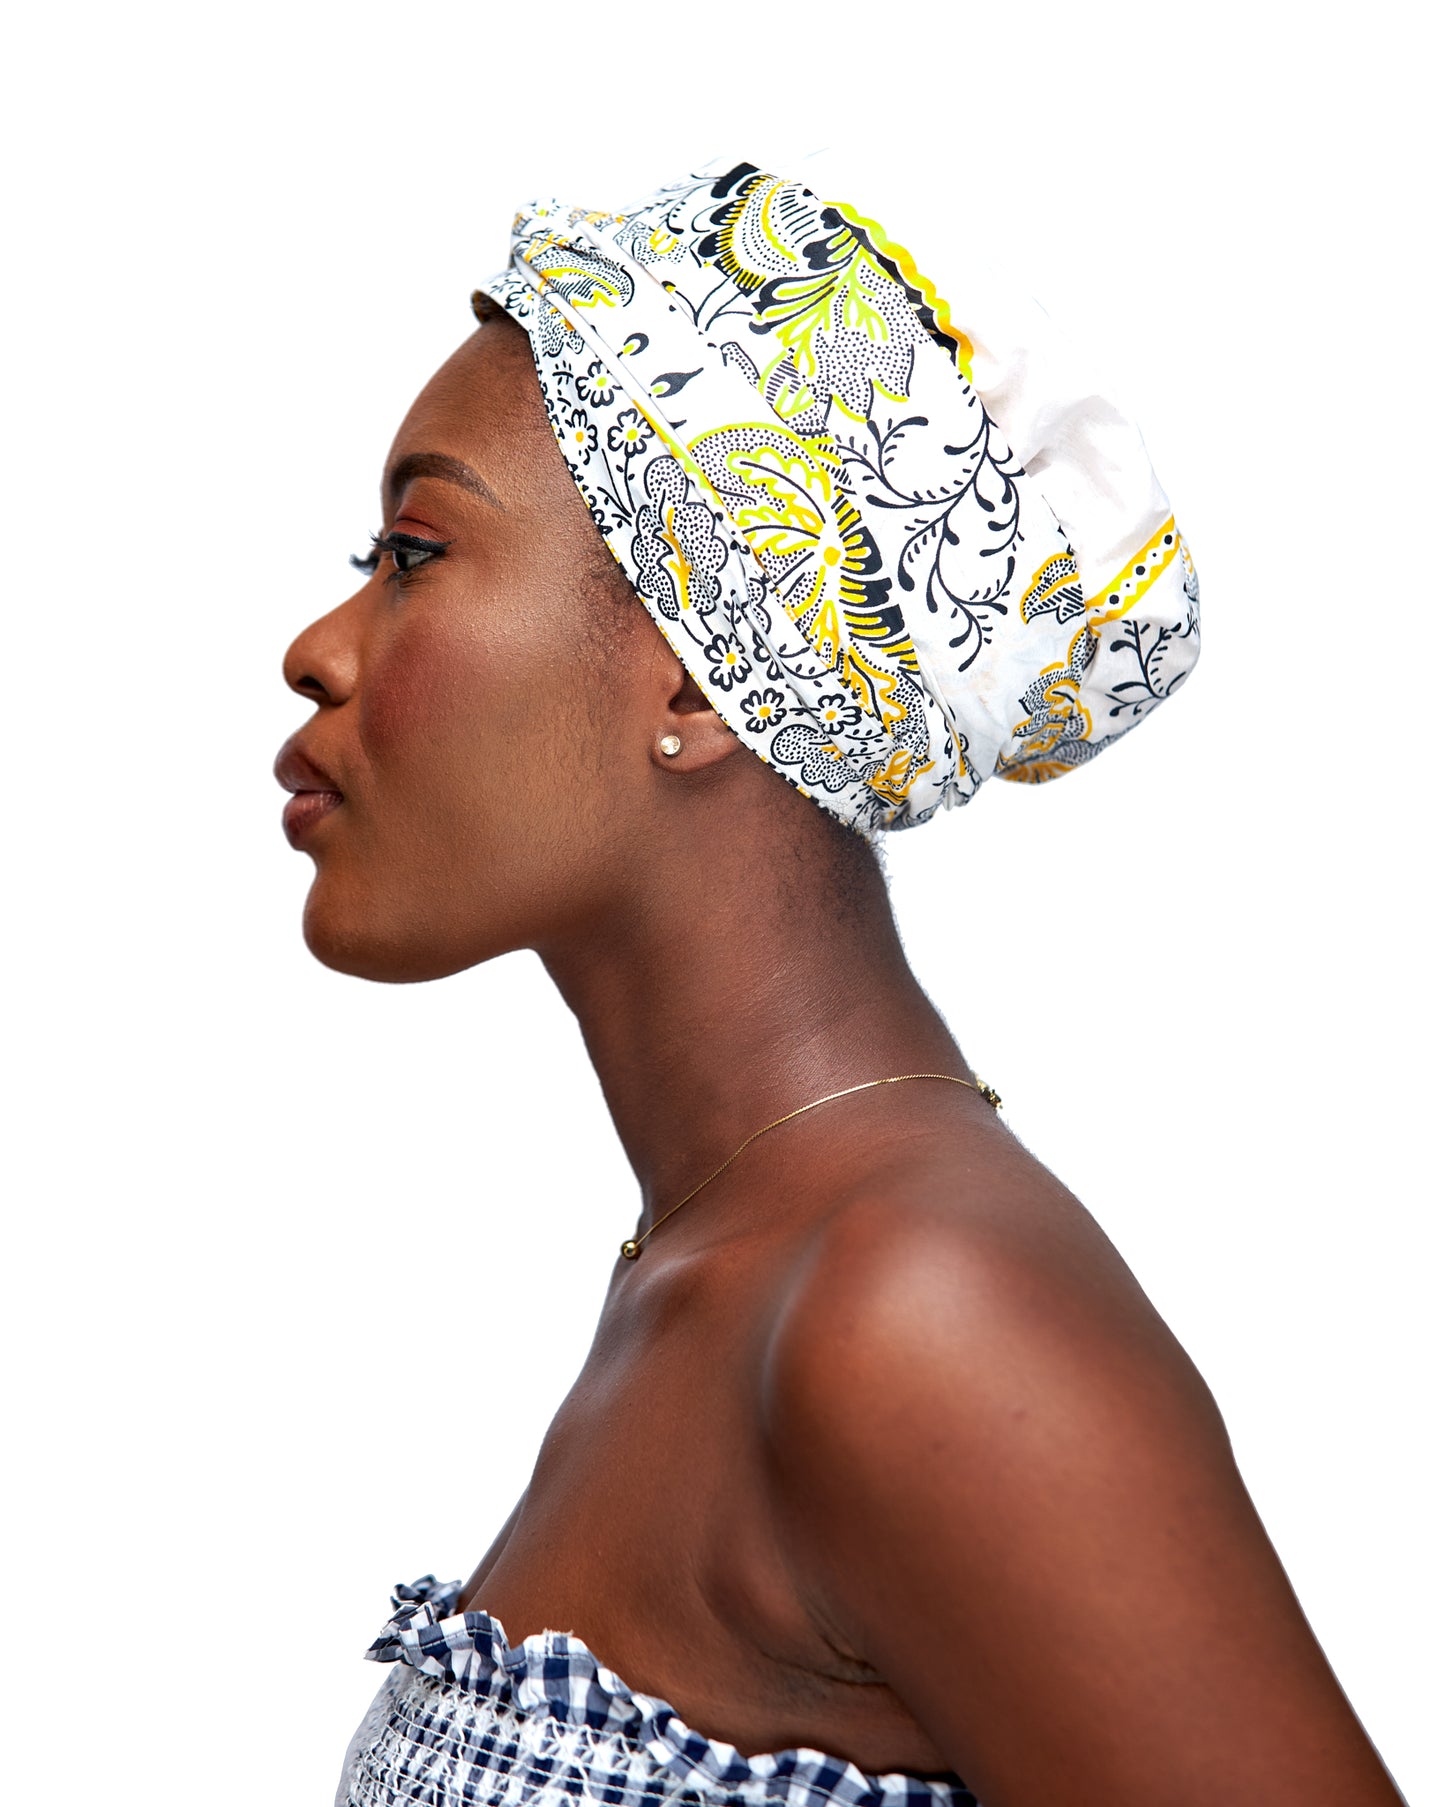 Ankara Wax Print Made of White Yellow And Black Blend of Beautiful Colours And Pattern, Hand Made Elastic Silklined Bonnet With Band